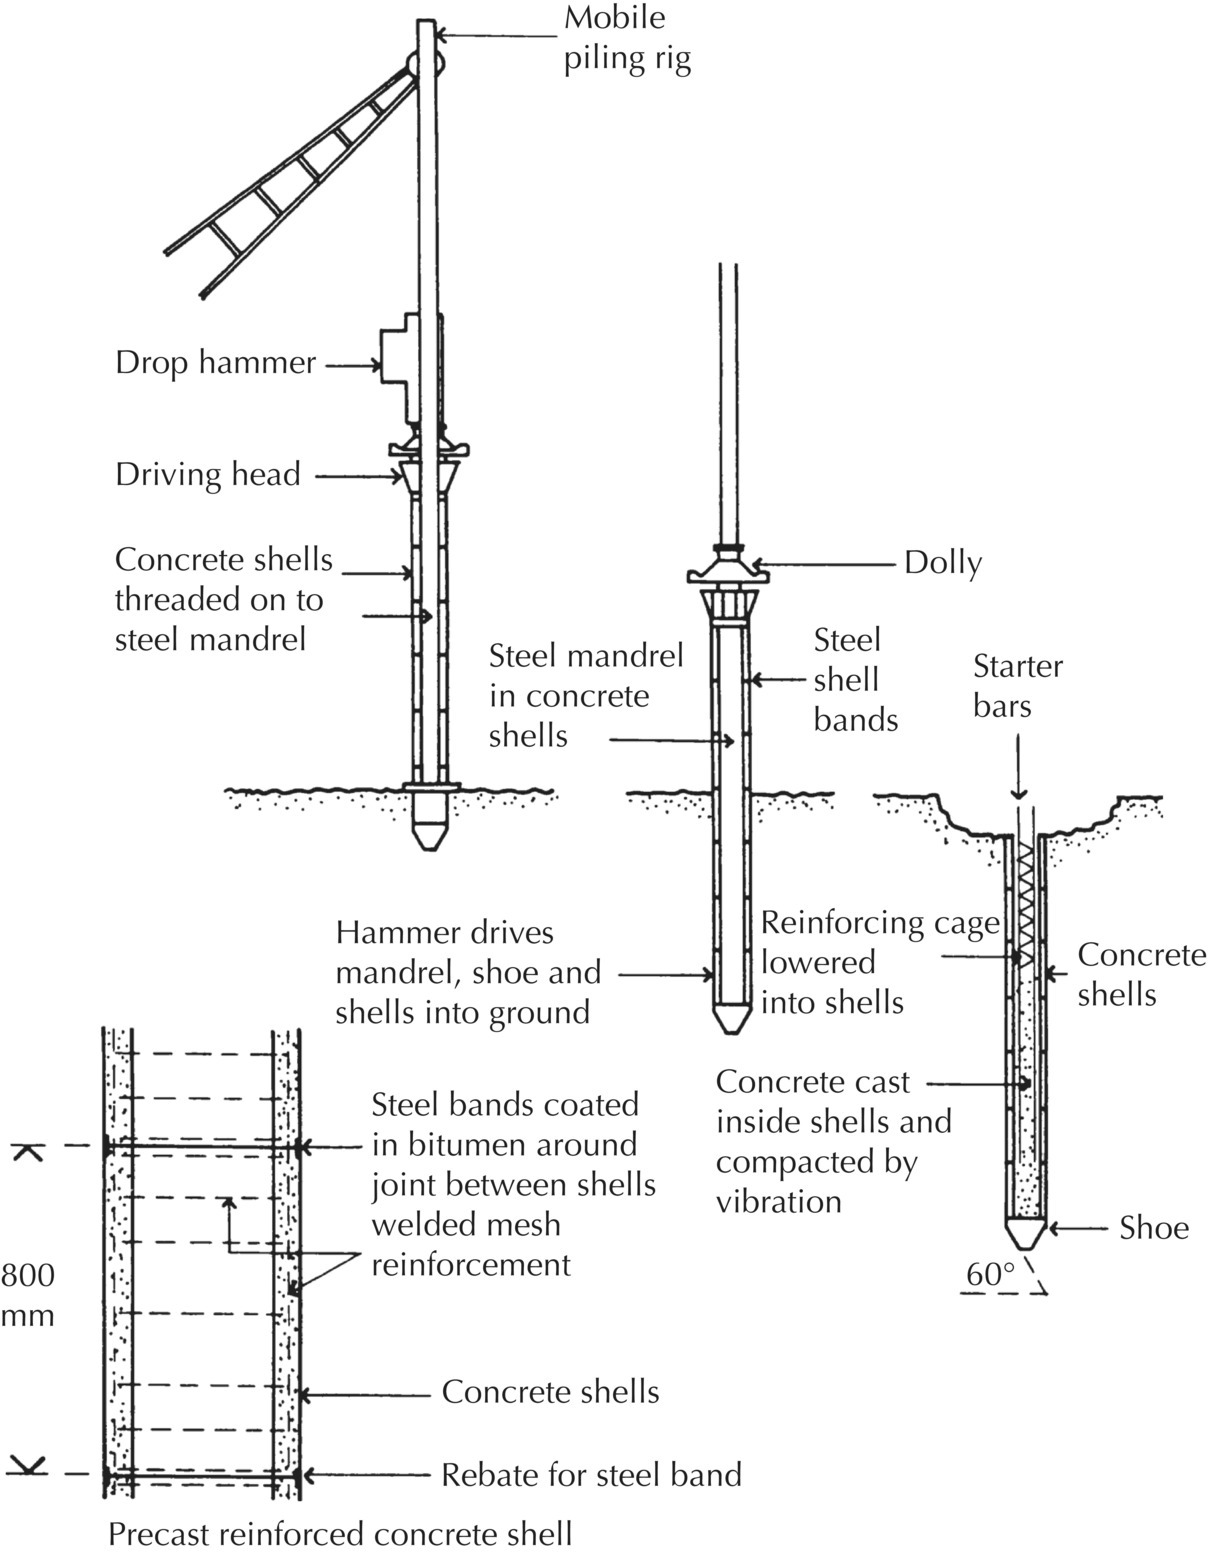 Diagrams of a driven cast-in-place pile with a permanent reinforced concrete casing with arrows labeled mobile piling rig, drop hammer, driving head, and concrete shells threaded on to steel mandrel; a driven cast-in-place pile with a permanent reinforced concrete casing with arrows labeled dolly, steel mandrel in concrete shells, steel shell bands, and hammer drives mandrel, shoe, and shells into ground; a driven cast-in-place pile with a permanent reinforced concrete casing with arrows labeled starter bas, reinforcing cage lowered into shells, concrete cast inside shells and compacted by vibration, etc.; and a precast reinforced concrete shell having 2 vertical bars labeled concrete shells with horizontal lines between labeled steel bands coated in bitumen around joint between shells welded mesh reinforcement, etc.